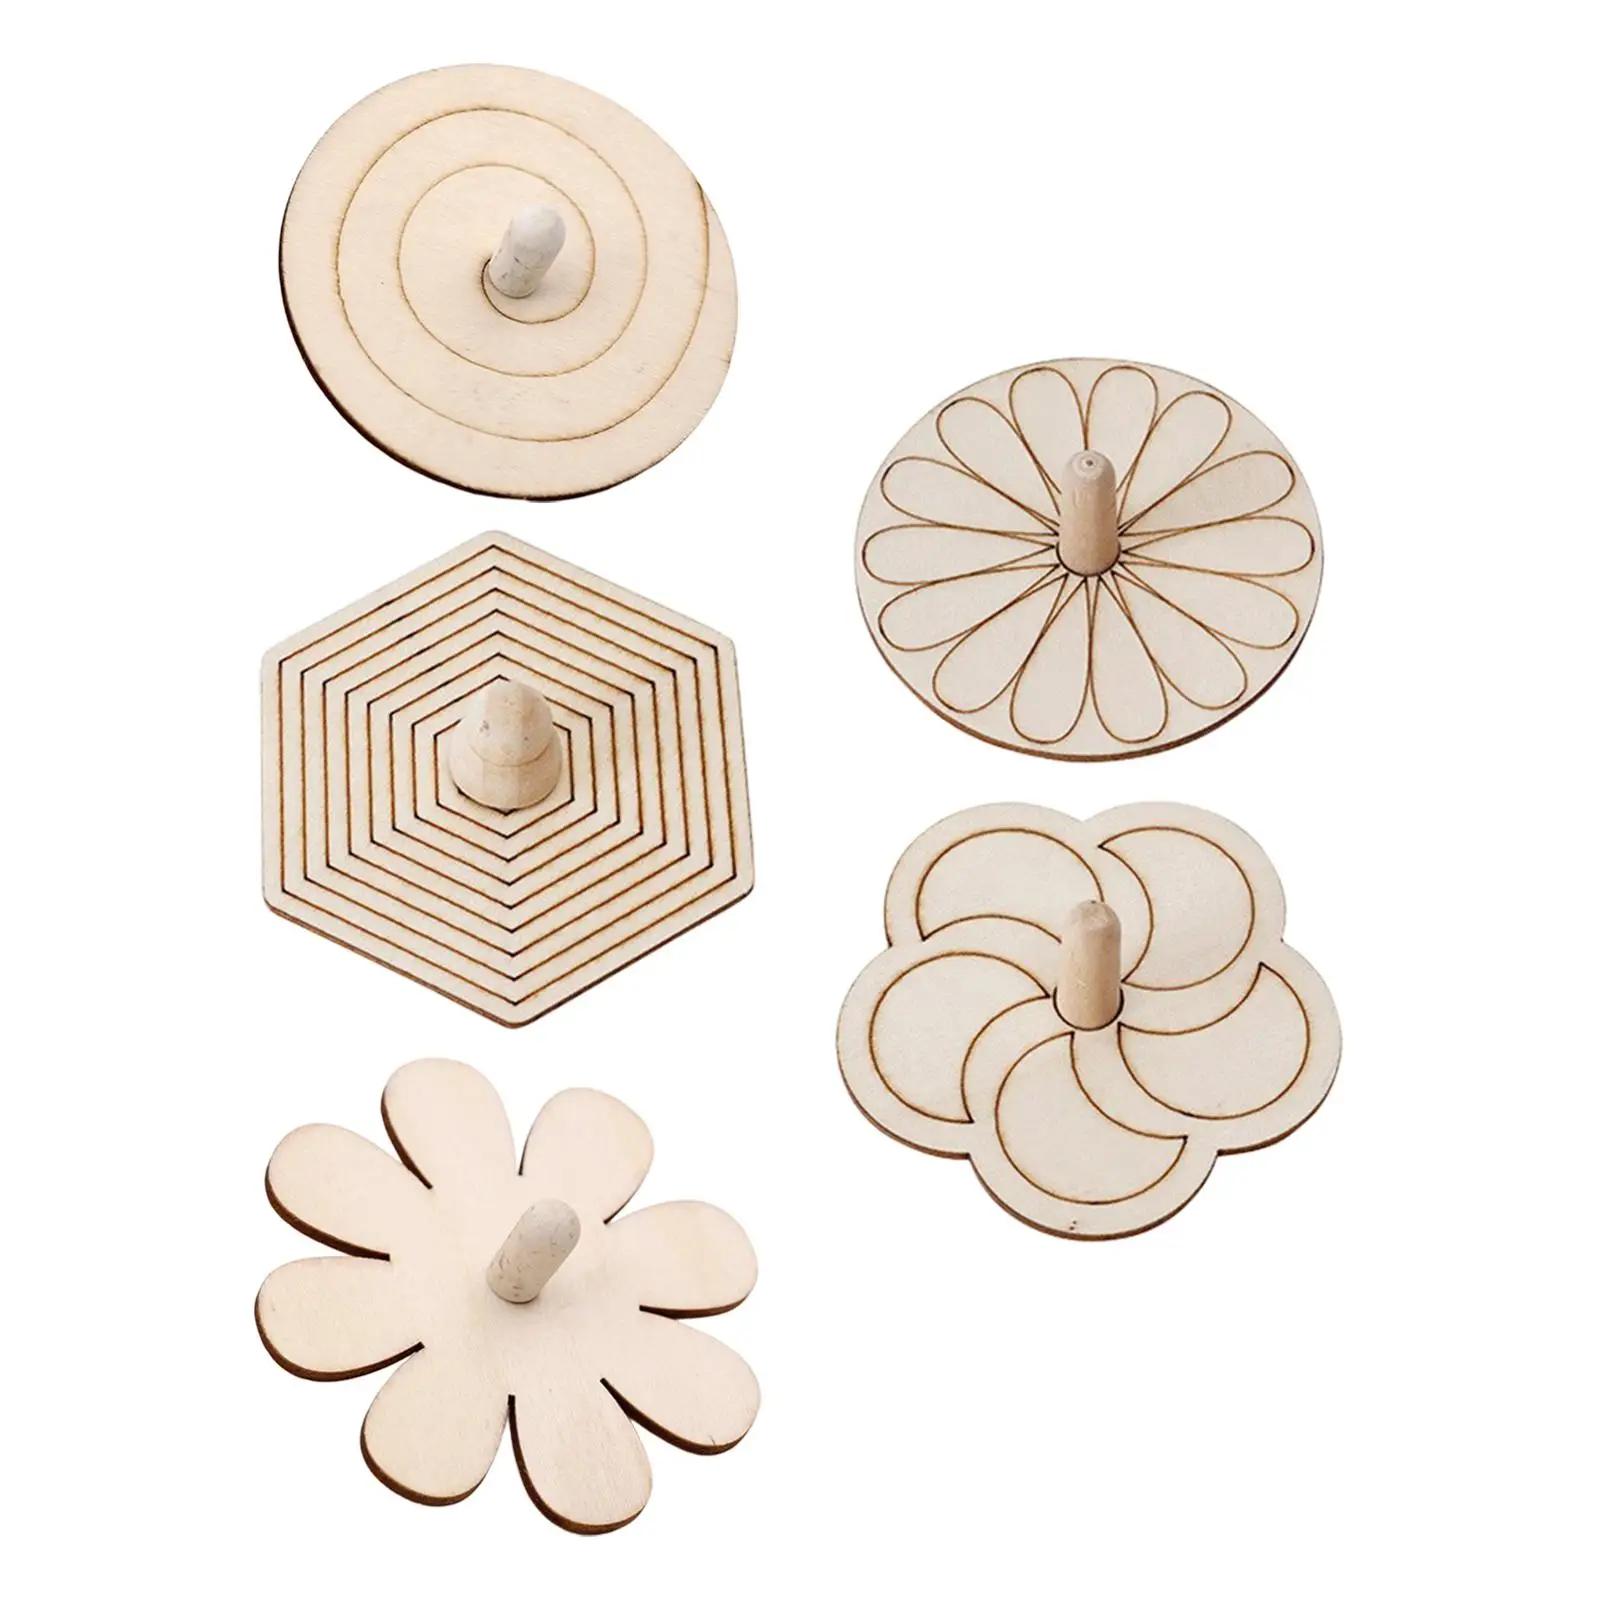 5Pcs Wooden Whirling Top Educational Painted Craft for Party Favours Kids